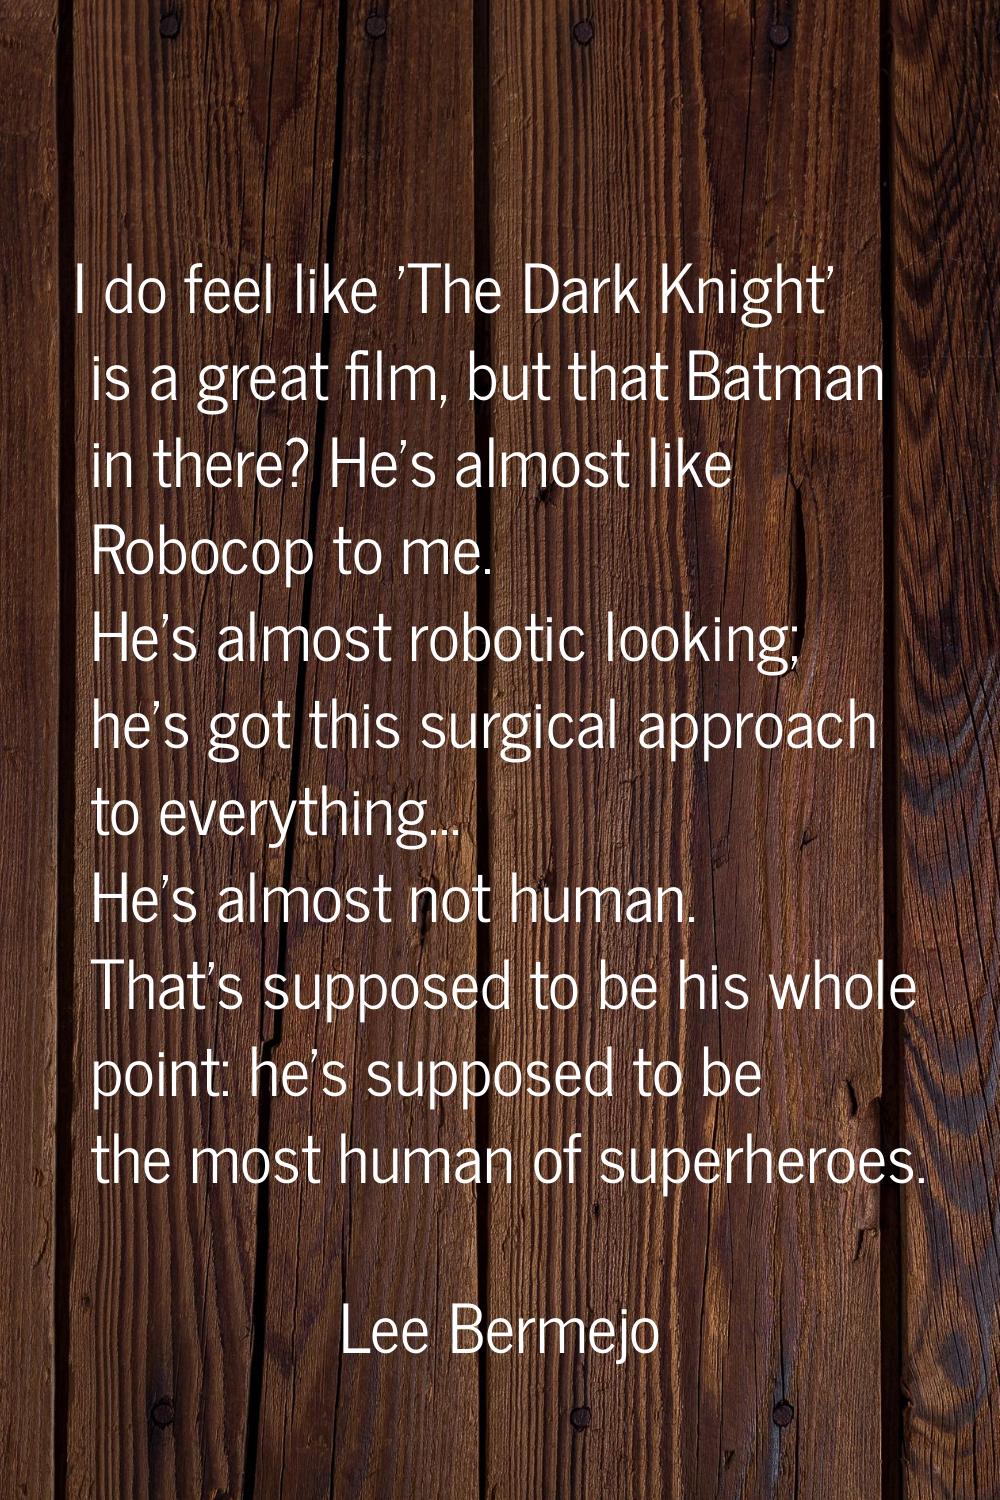 I do feel like 'The Dark Knight' is a great film, but that Batman in there? He's almost like Roboco